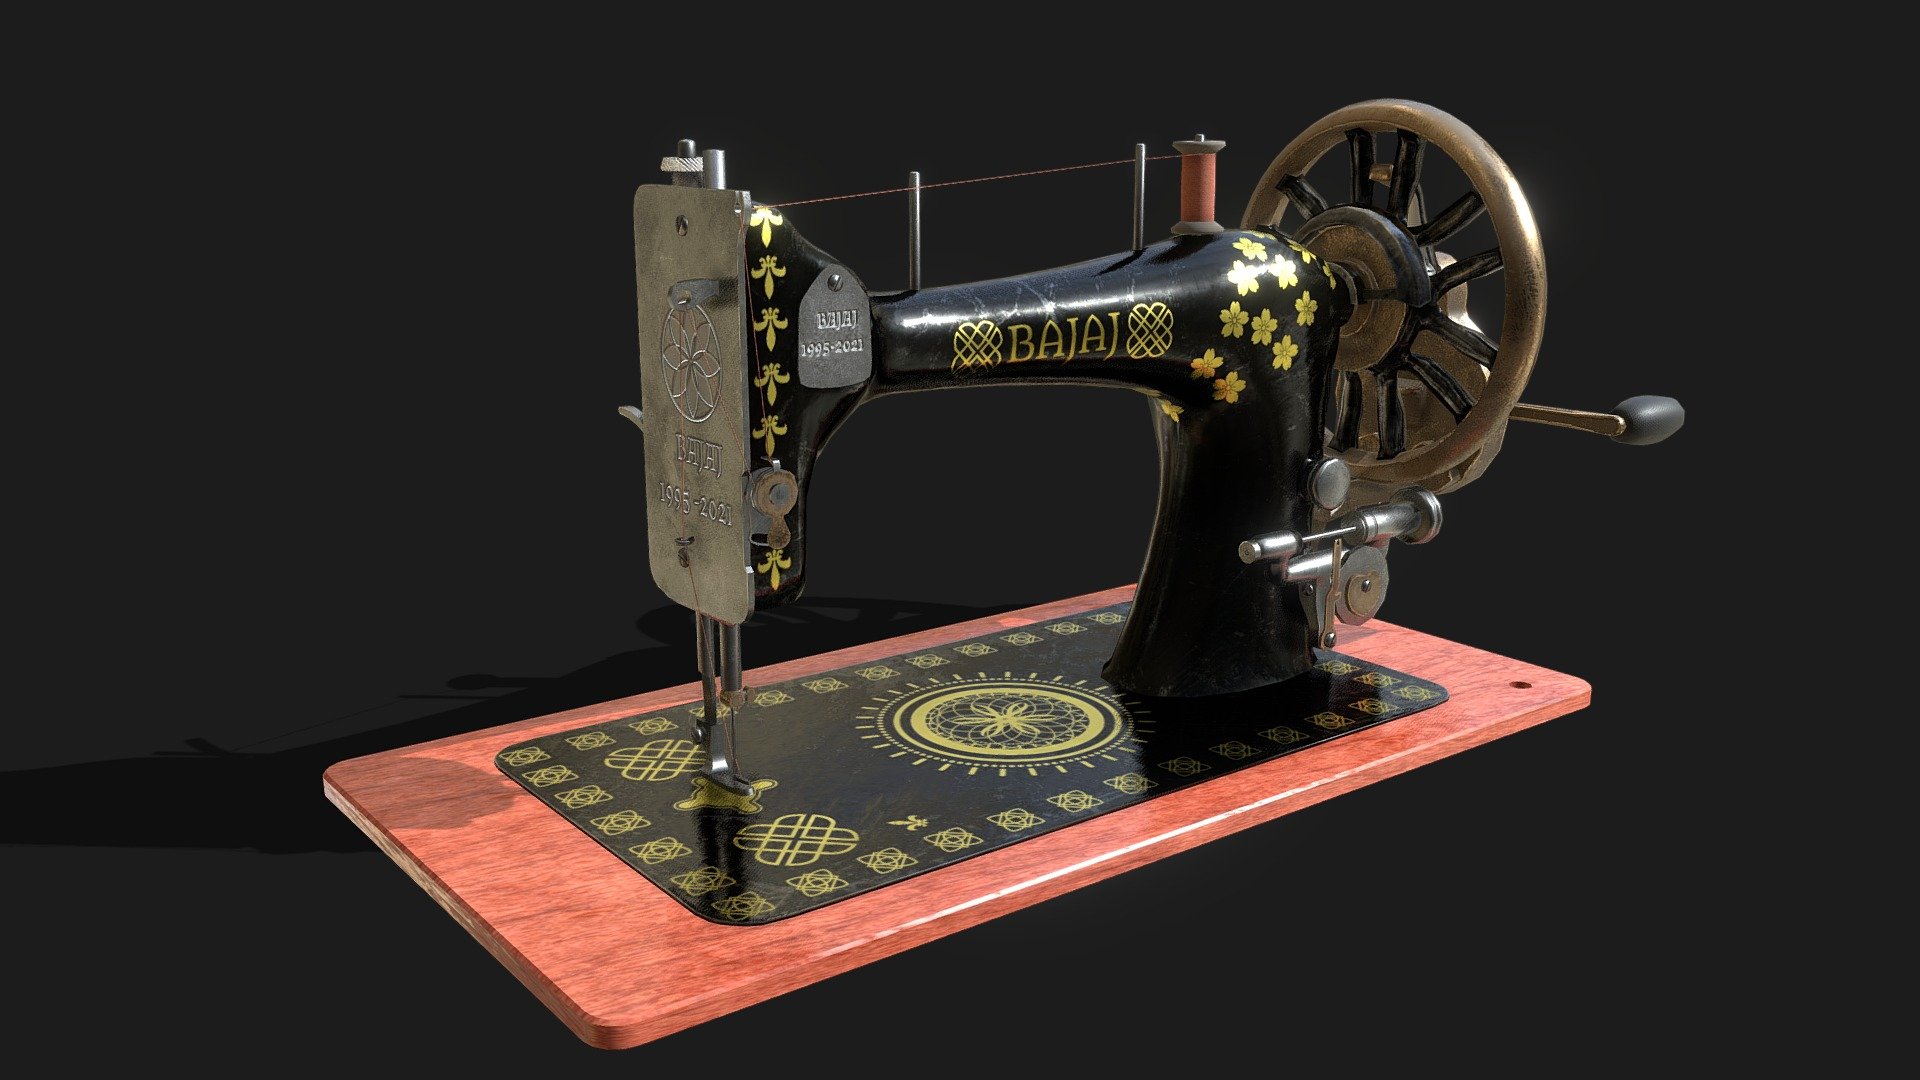 IN THE ZIP FILE YOU WILL GET:-
MAYA FILE
MARMOSET TOOLBAG FILE
TEXTURES 
COMPLEMENTRY RENDERS 

SEWING MACHINE - LOW POLLY ASSET🎯

RENDER OUTPUT - MARMOSET TOOLBAG 4

MADE IN: AUTODESK MAYA

TEXTURED IN: SUBSTANCE PAINTER &amp; photoshop

ASSIGNED WITH 1 MATERIAL
2048 × 2048 RESOLUTION.

my portfolio link: https://ashwinashok22.artstation.com/

my rookies' profile: https://www.therookies.co/u/AshwinashokIN/about

my Instagram: https://www.instagram.com/aashwin_/

my YouTube: https://www.youtube.com/channel/UCRAM5Y-DoER4Og2z_fJFi2Q - sewing machine - Buy Royalty Free 3D model by ASHWIN ASHOK (@ASHWINASHOK1822) 3d model